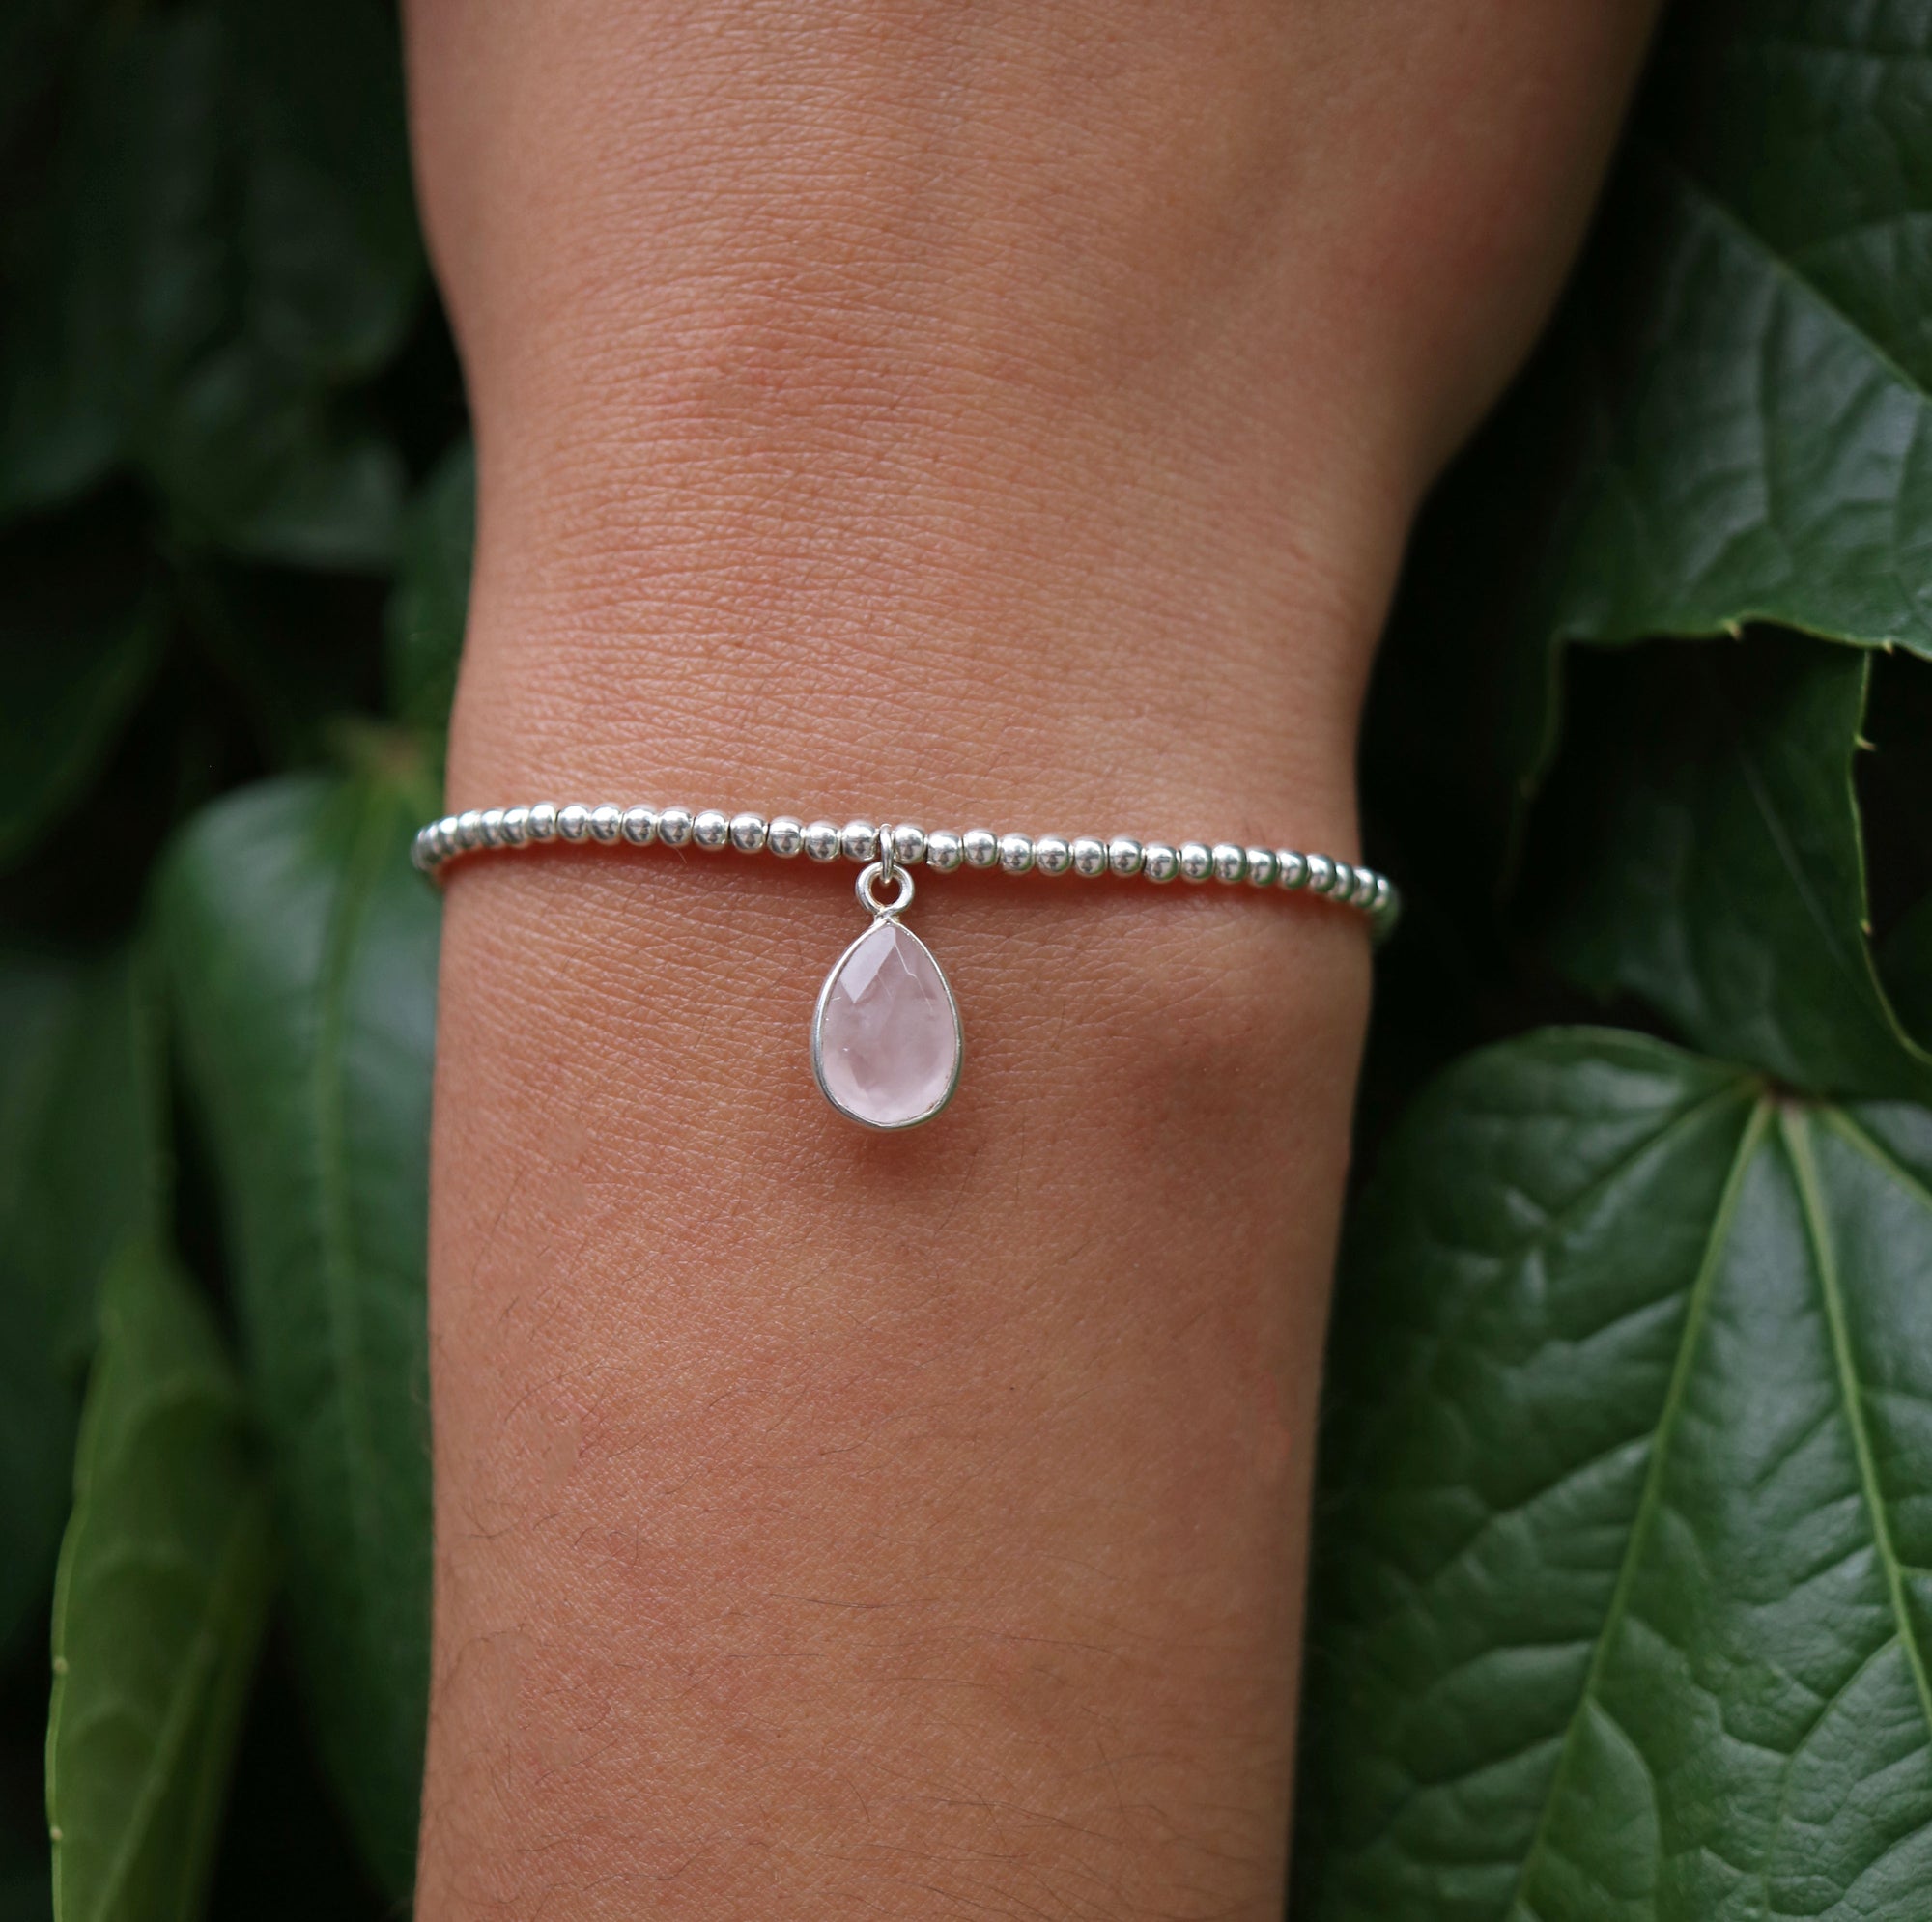 Dainty sterling silver beaded stretch bracelet featuring a natural rose quartz teardrop charm encased in sterling silver